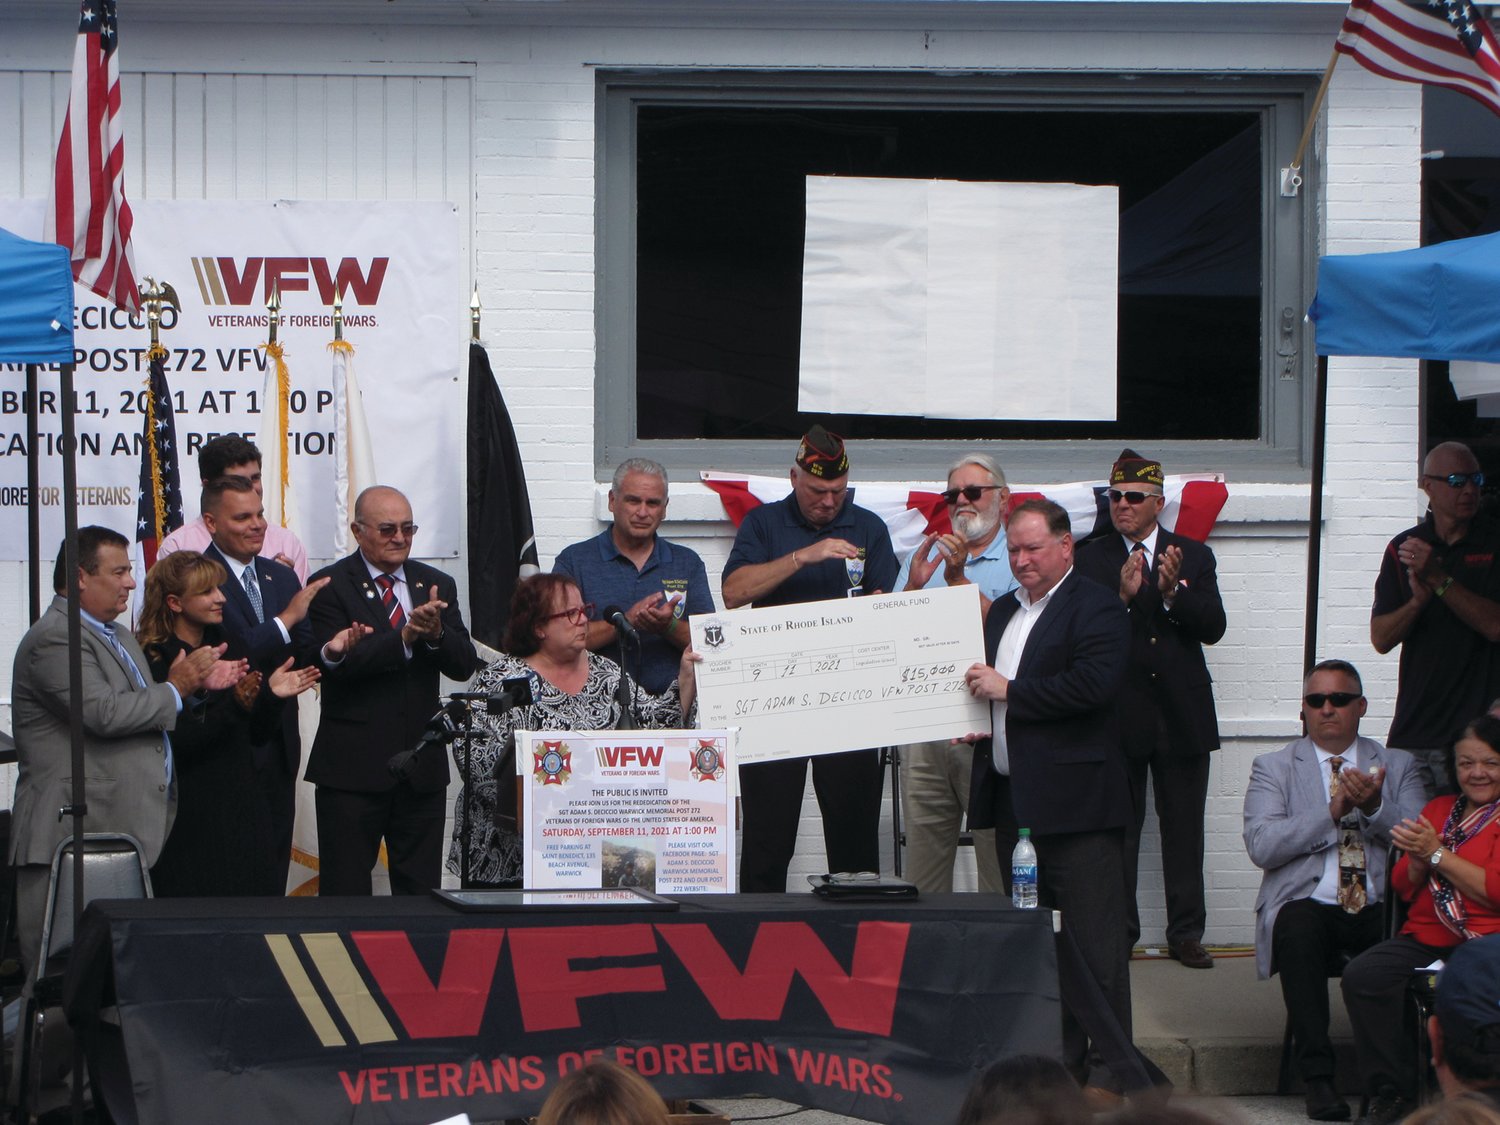 STATE’S SUPPORT: Members of the General Assembly present a $15,000 grant to Sgt. Adam S. DeCiccio Warwick Memorial VFW Post 272 during Saturday’s ceremony. The funding will help support renovations for the building, located in Warwick’s Conimicut Village. Commanding office